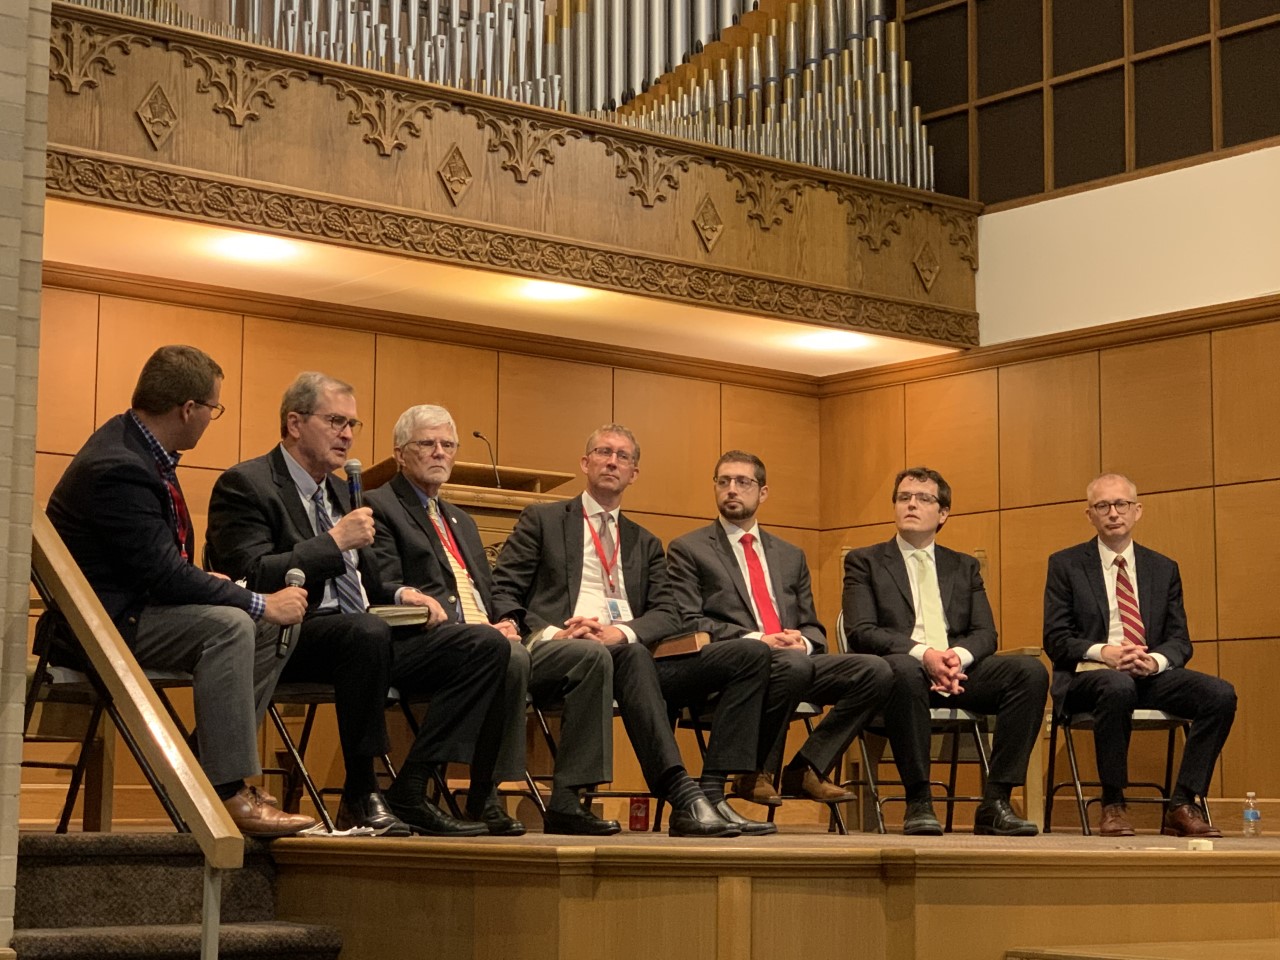 2020 Puritan Reformed Conference – Day Three